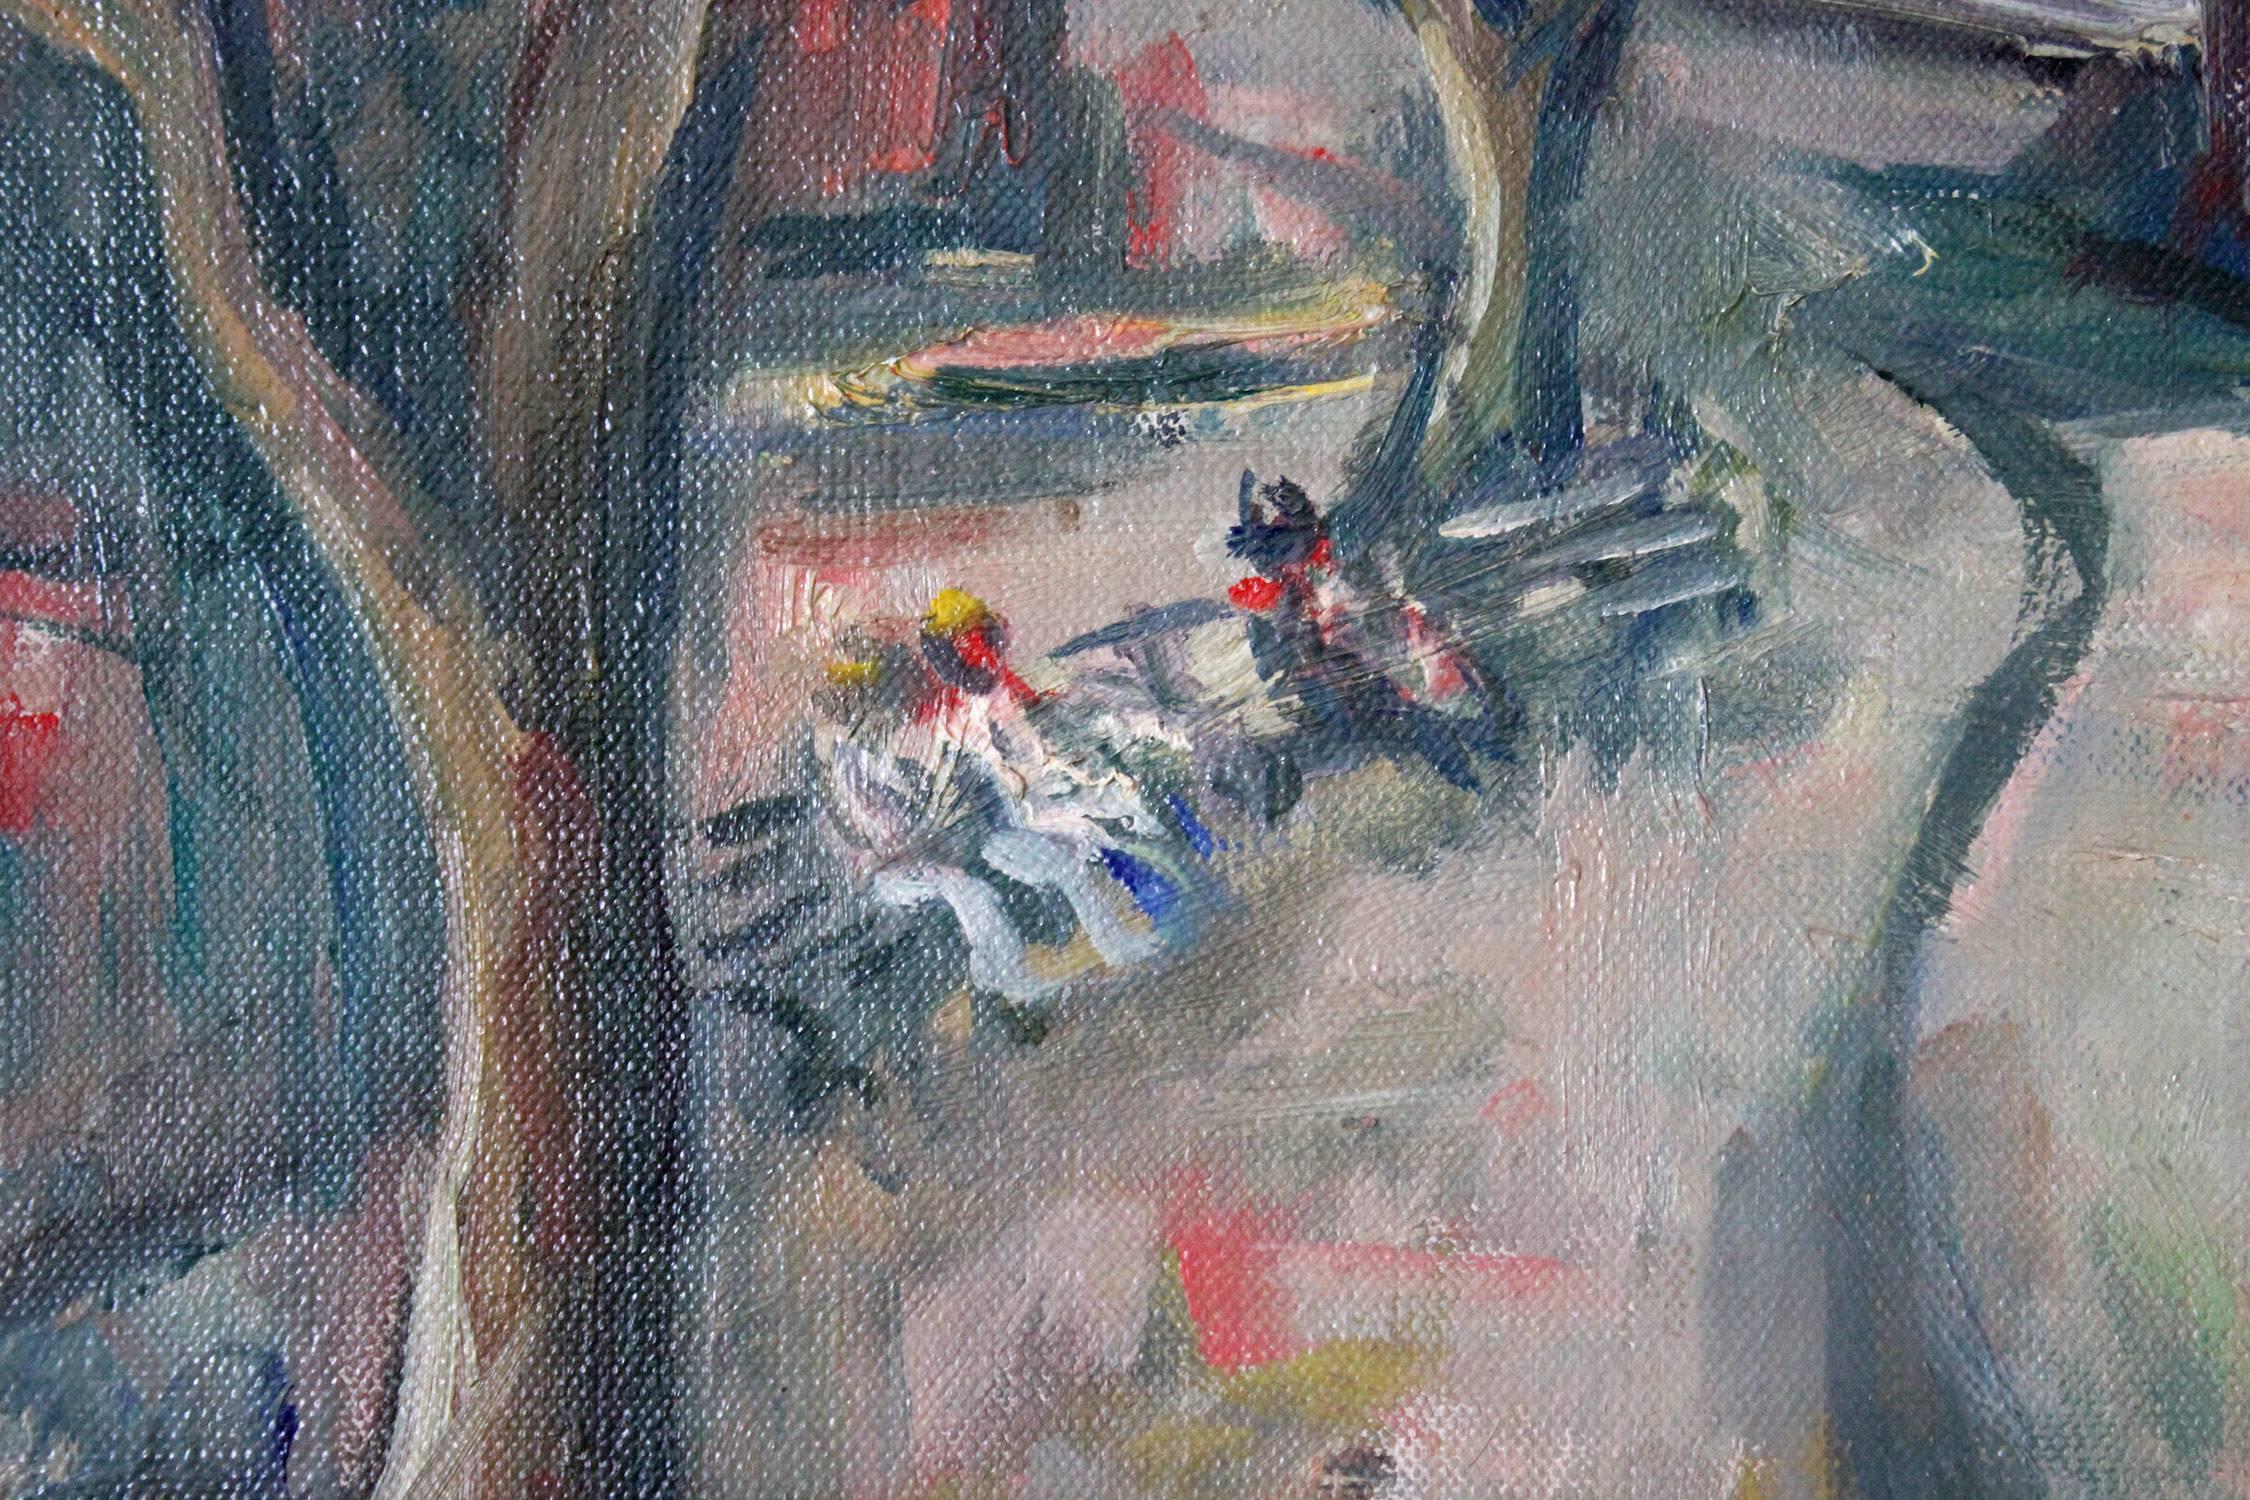 20th Century Impressionistic Oil Painting Snow in Washington Square Park 1